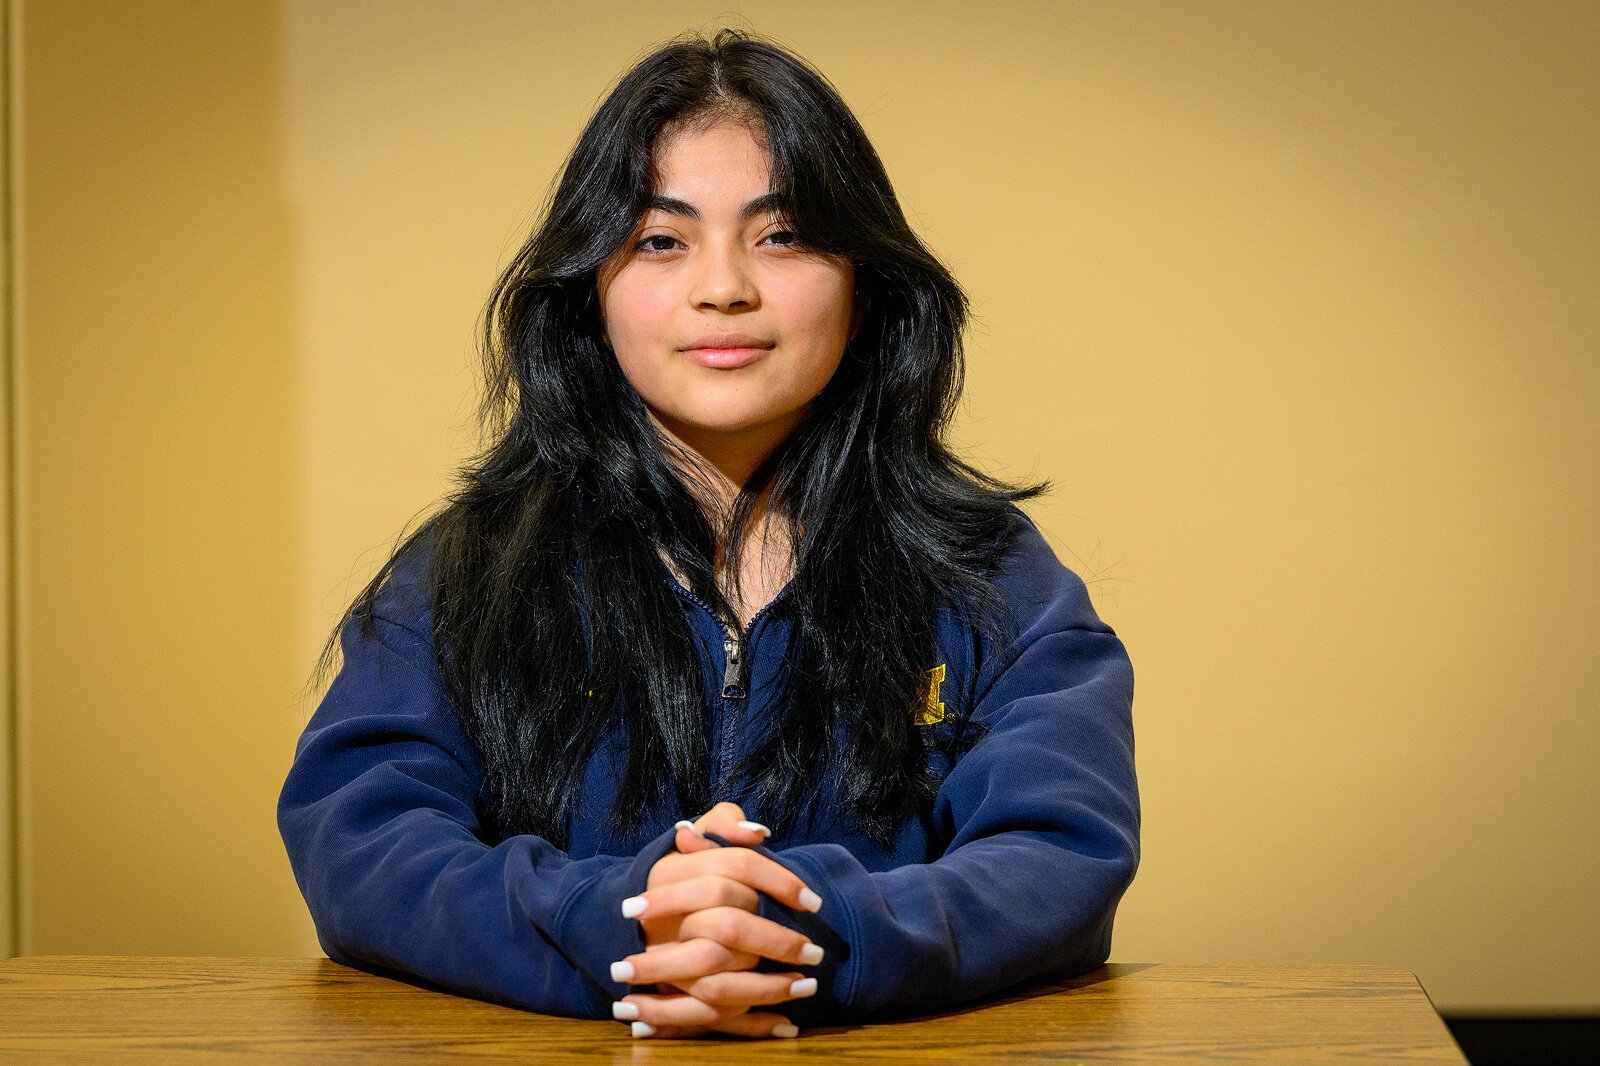 Ypsilanti Community High School student Ashley M. says other Latinx students have been her rock since she emigrated from Honduras.